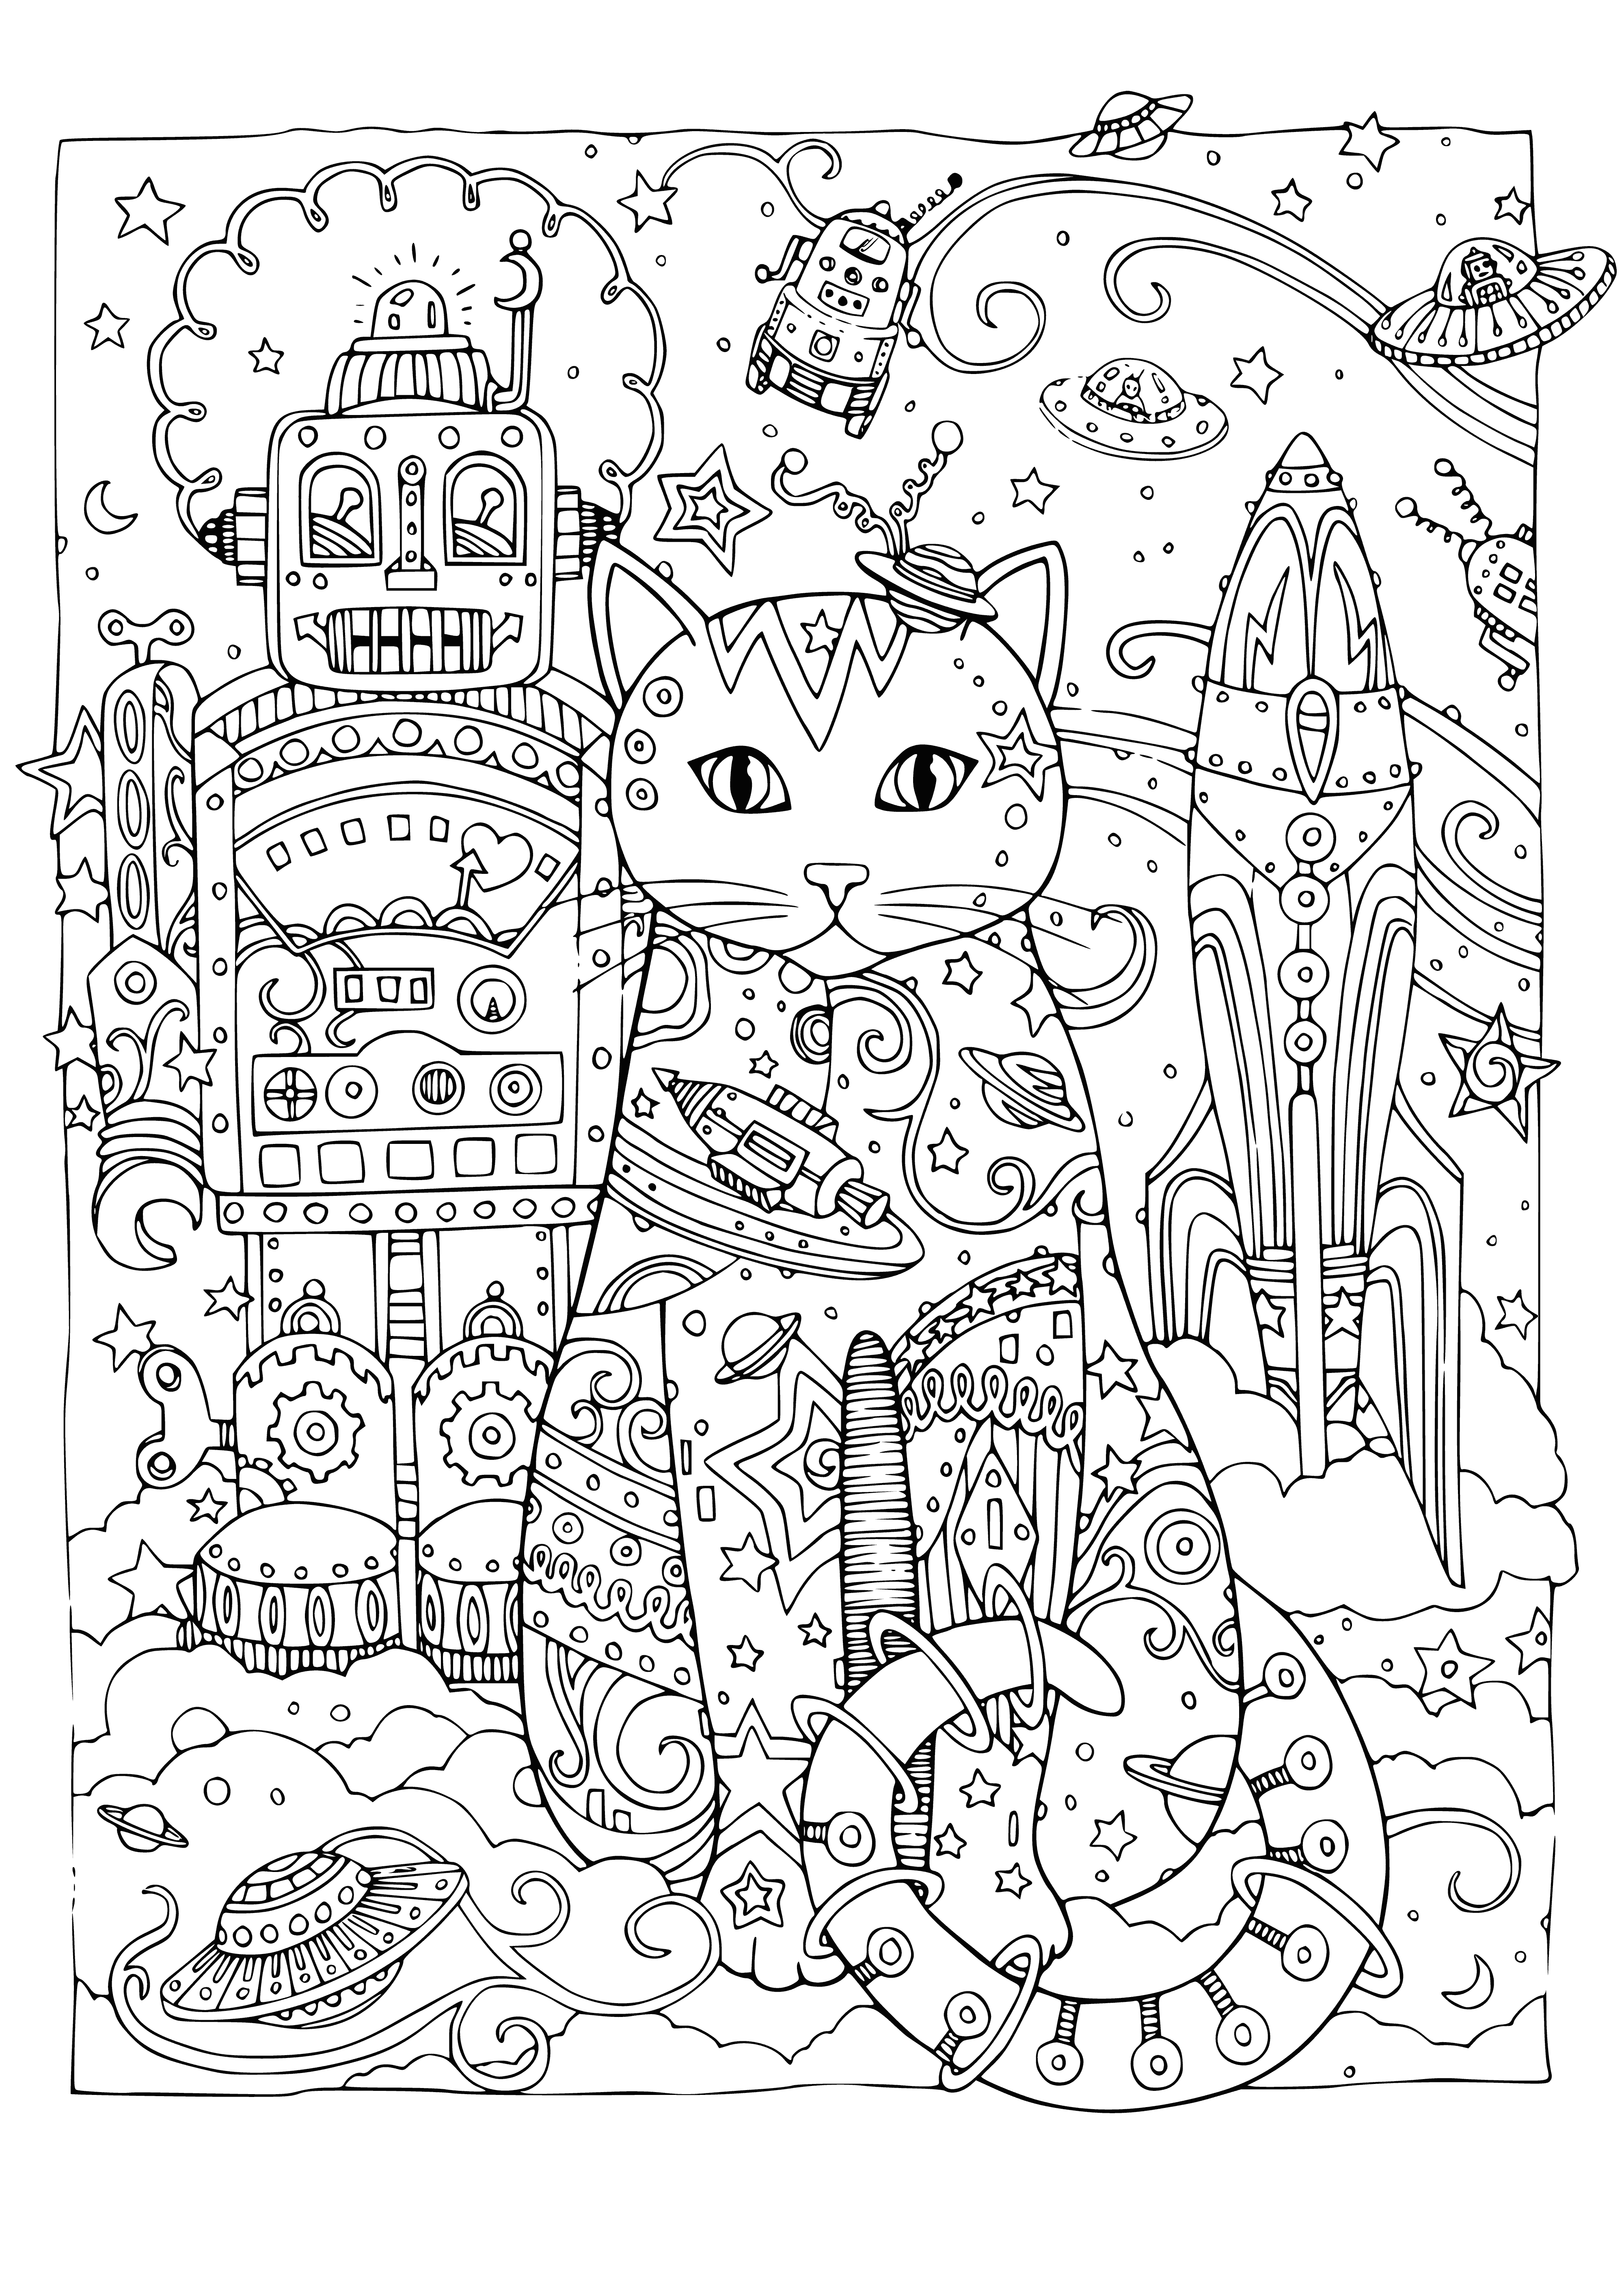 coloring page: Two cats enjoy a computer session; one typing, one observing. Both look content.